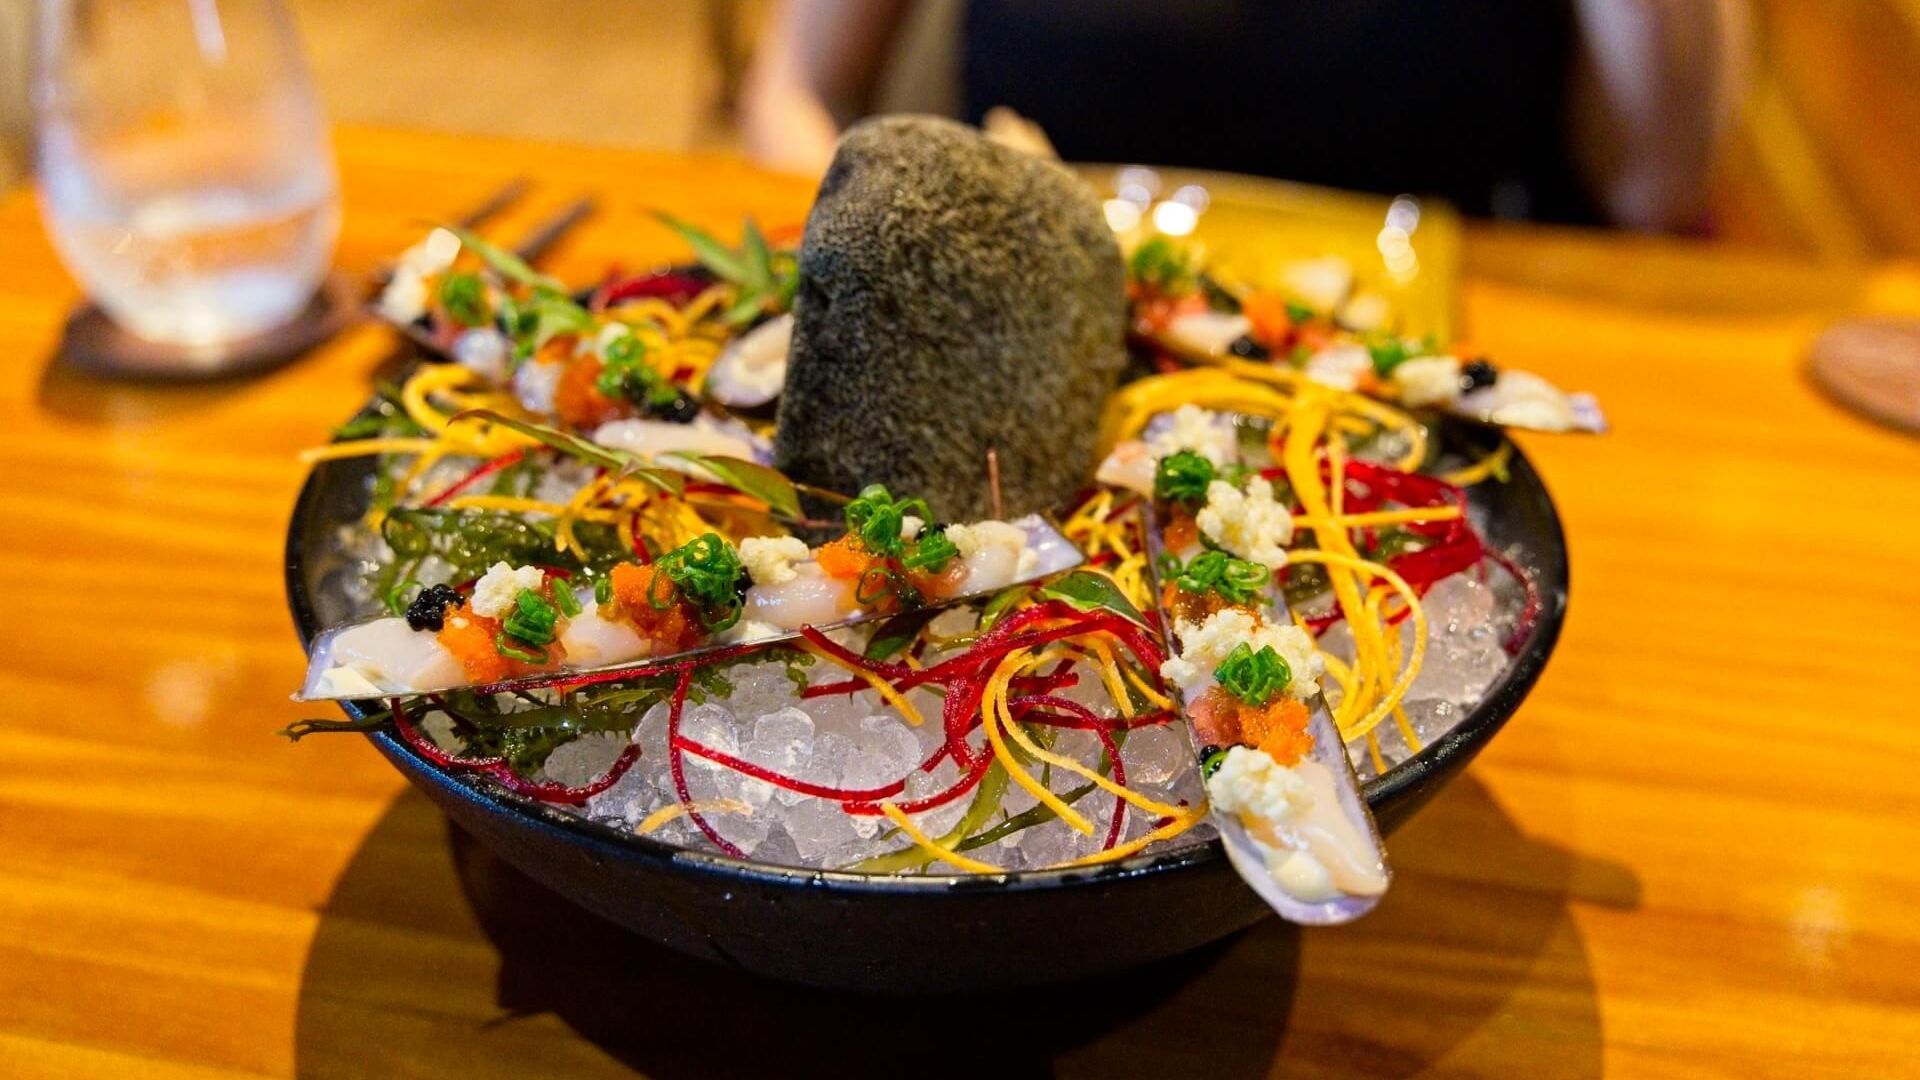 Maido: Lima's fusion marvel, Japanese-Peruvian fusion by Chef Mitsuharu Tsumura, crafting unforgettable culinary experiences.